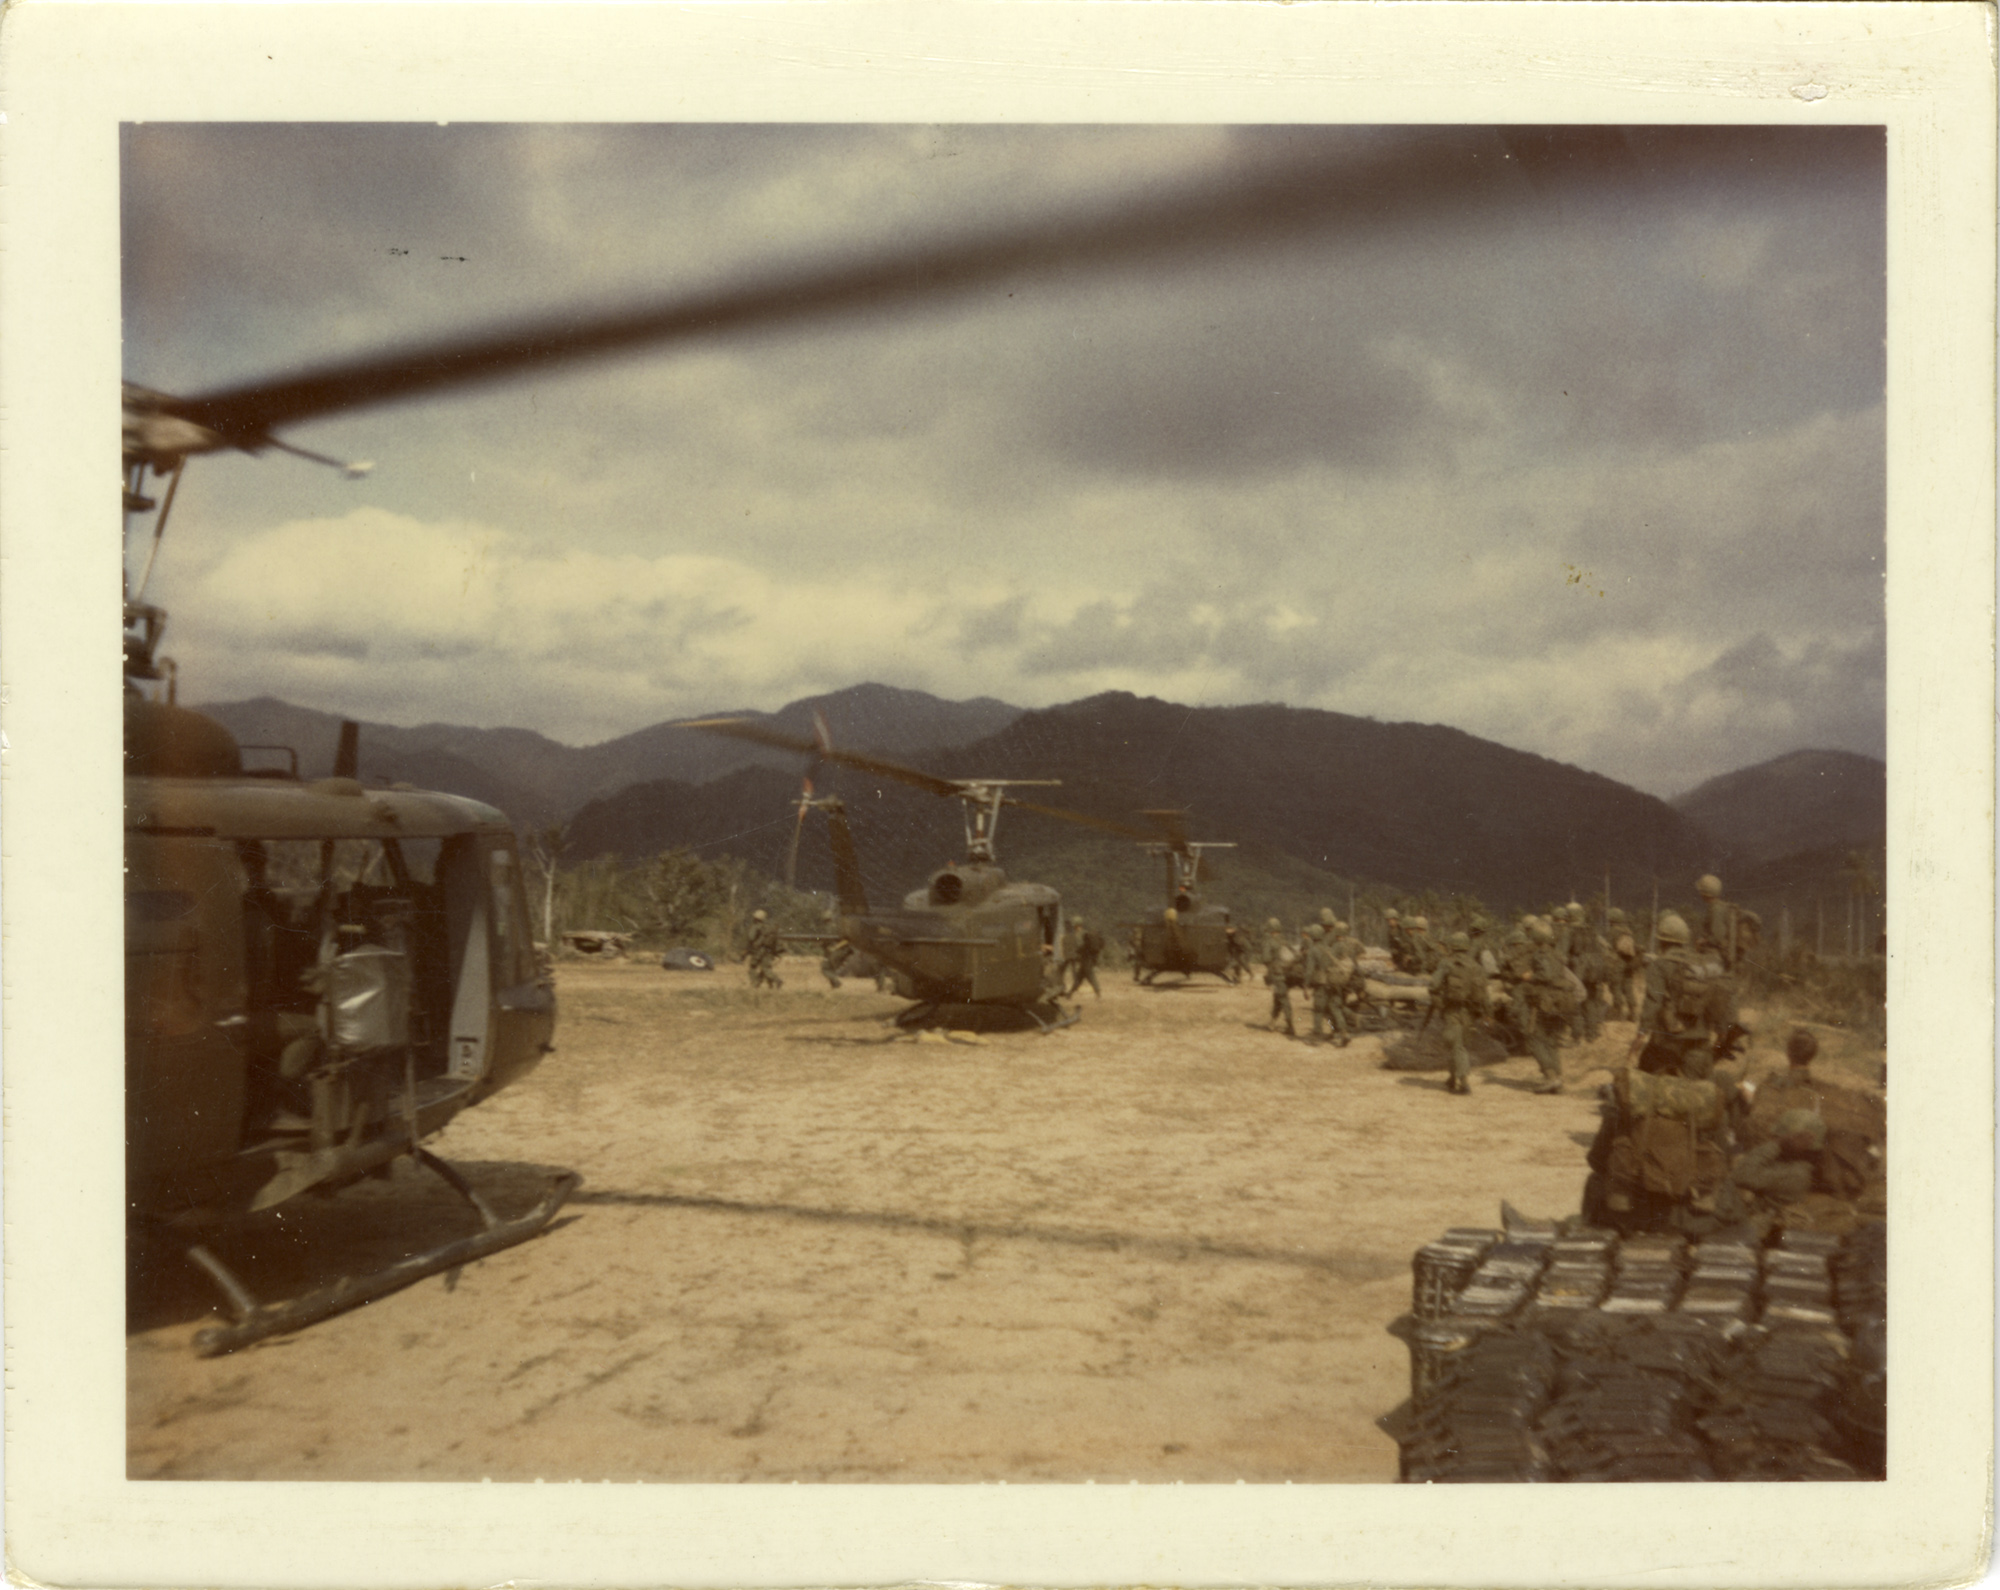 A group of military helicopters stations on the ground with mountains in the distance